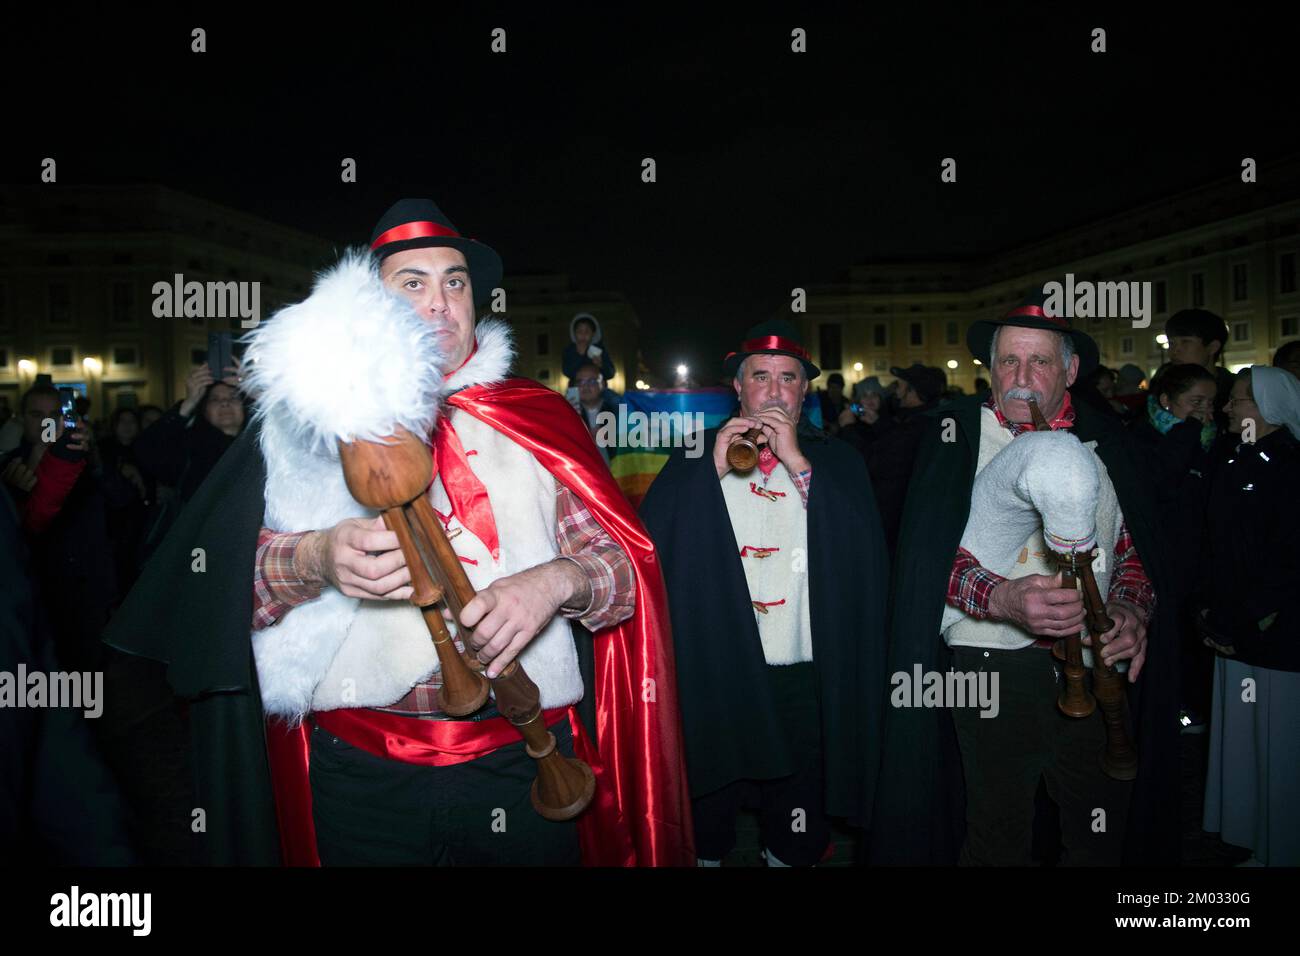 Vatican, Vatican. 03rd Dec, 2022. Italy, Rome, Vatican, 22/12/3 Bagpipers play at St. Peter's Square after the Christmas tree and nativity scene lighting ceremony at the Vatican Photograph by Alessia Giuliani/Catholic Press Photo. RESTRICTED TO EDITORIAL USE - NO MARKETING - NO ADVERTISING CAMPAIGNS Credit: Independent Photo Agency/Alamy Live News Stock Photo